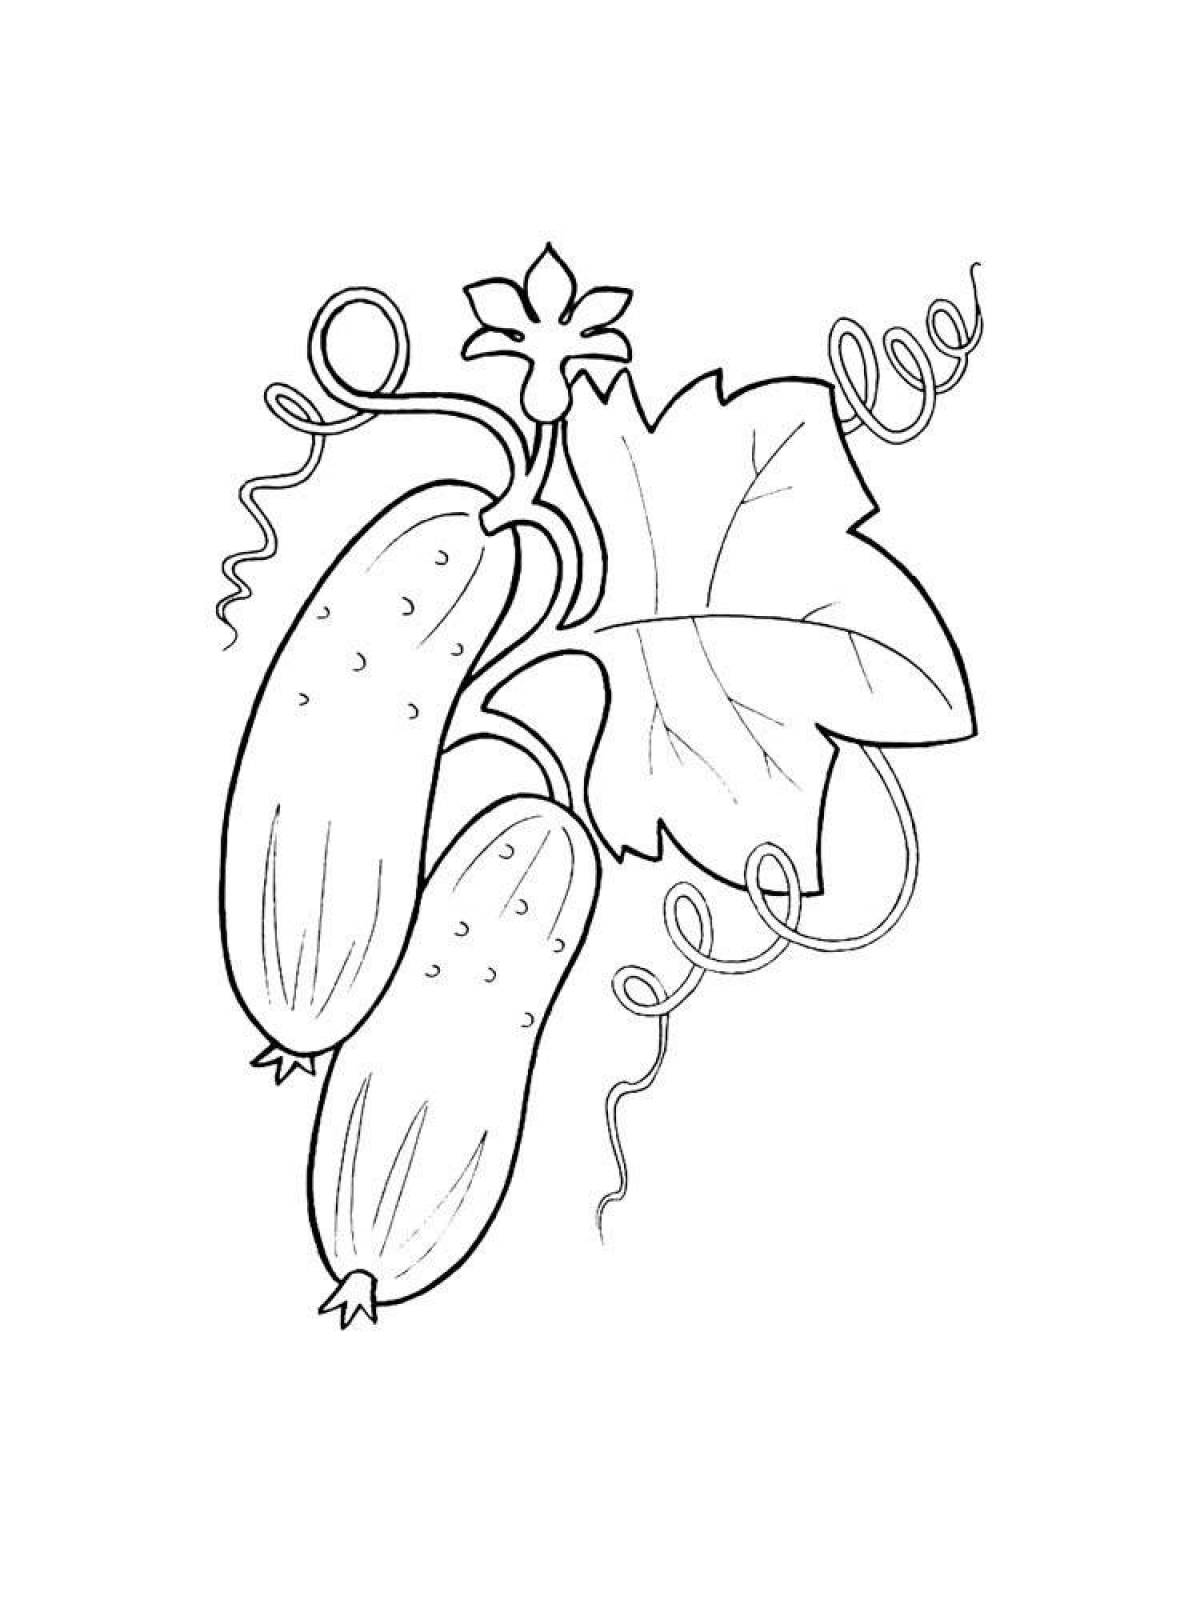 Color-frenzy cucumber coloring page for kids